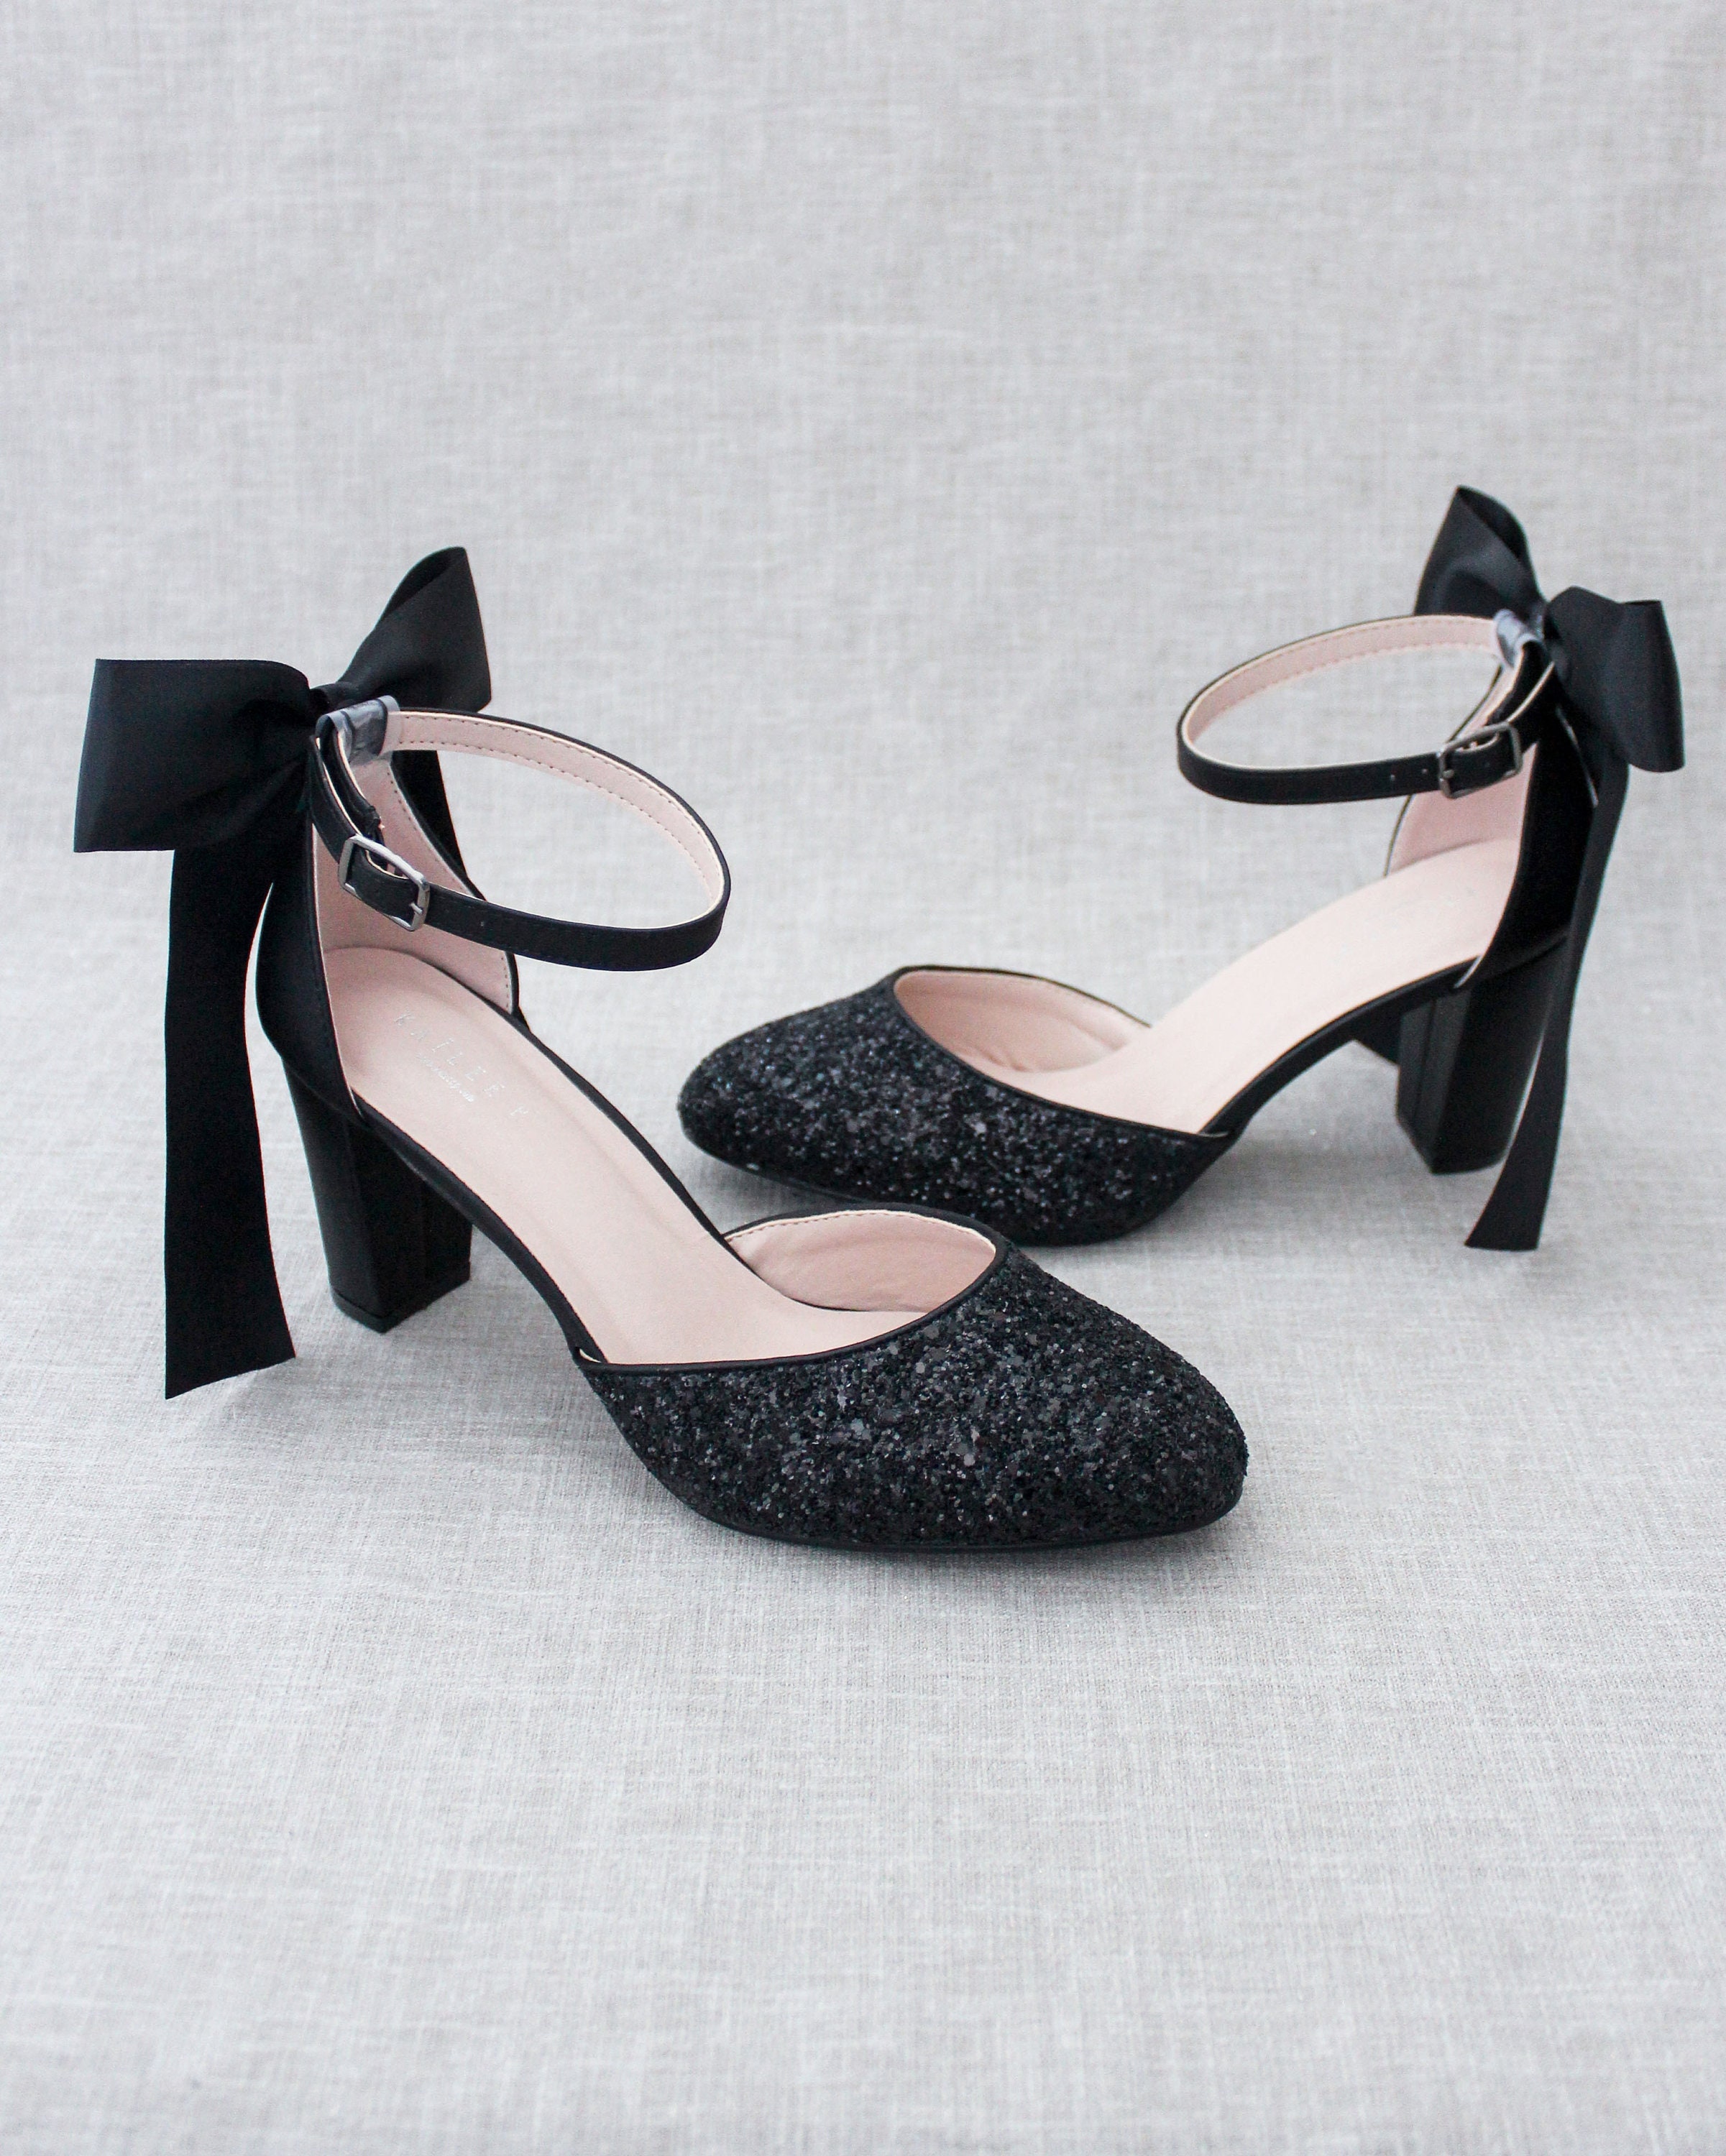 Busy Girl White Black Heels for Women Diamond Women High Heel Shoes New  Styles Fashion Lace up Square Toe Suede Lady - China Walking Style Shoe and  Casual Shoes price | Made-in-China.com